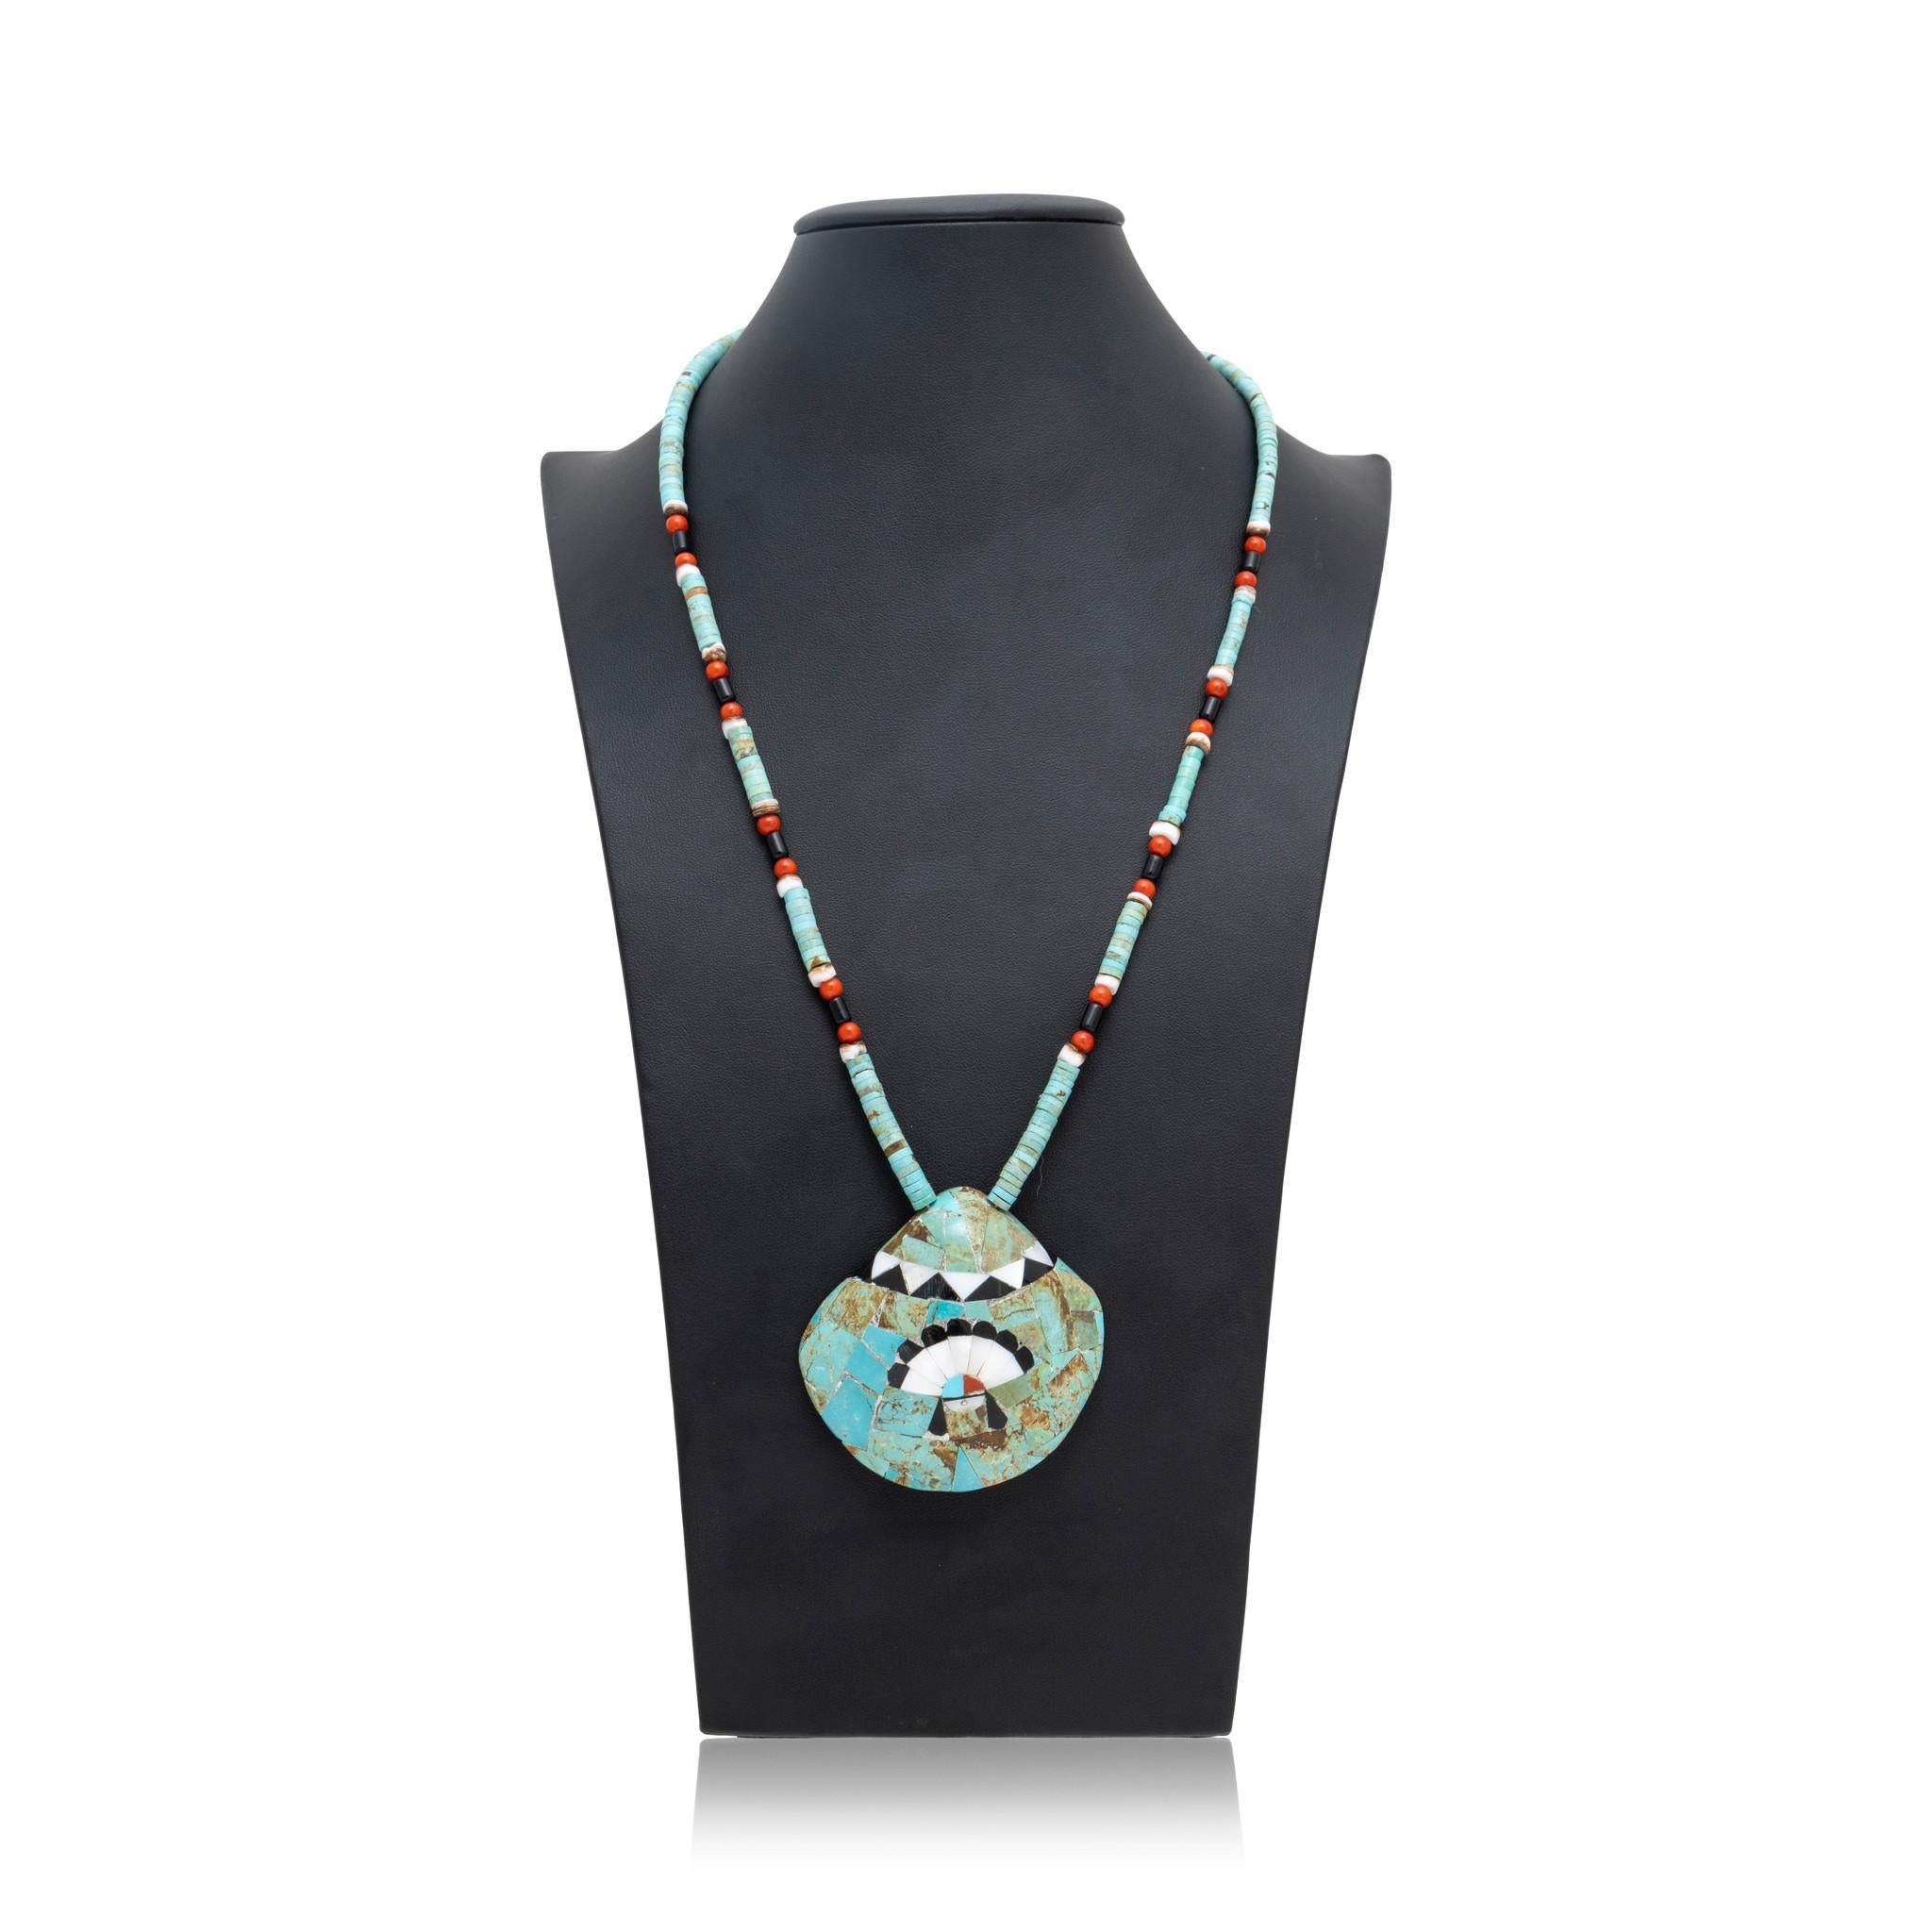 Native American Zuni Indian Kingman turquoise necklace. With beaded chain featuring repeating pattern of Heishi turquoise beads, coral, mother of pearl, and onyx. Chain ends in large shell pendant with inlaid stones of turquoise, onyx, mother of